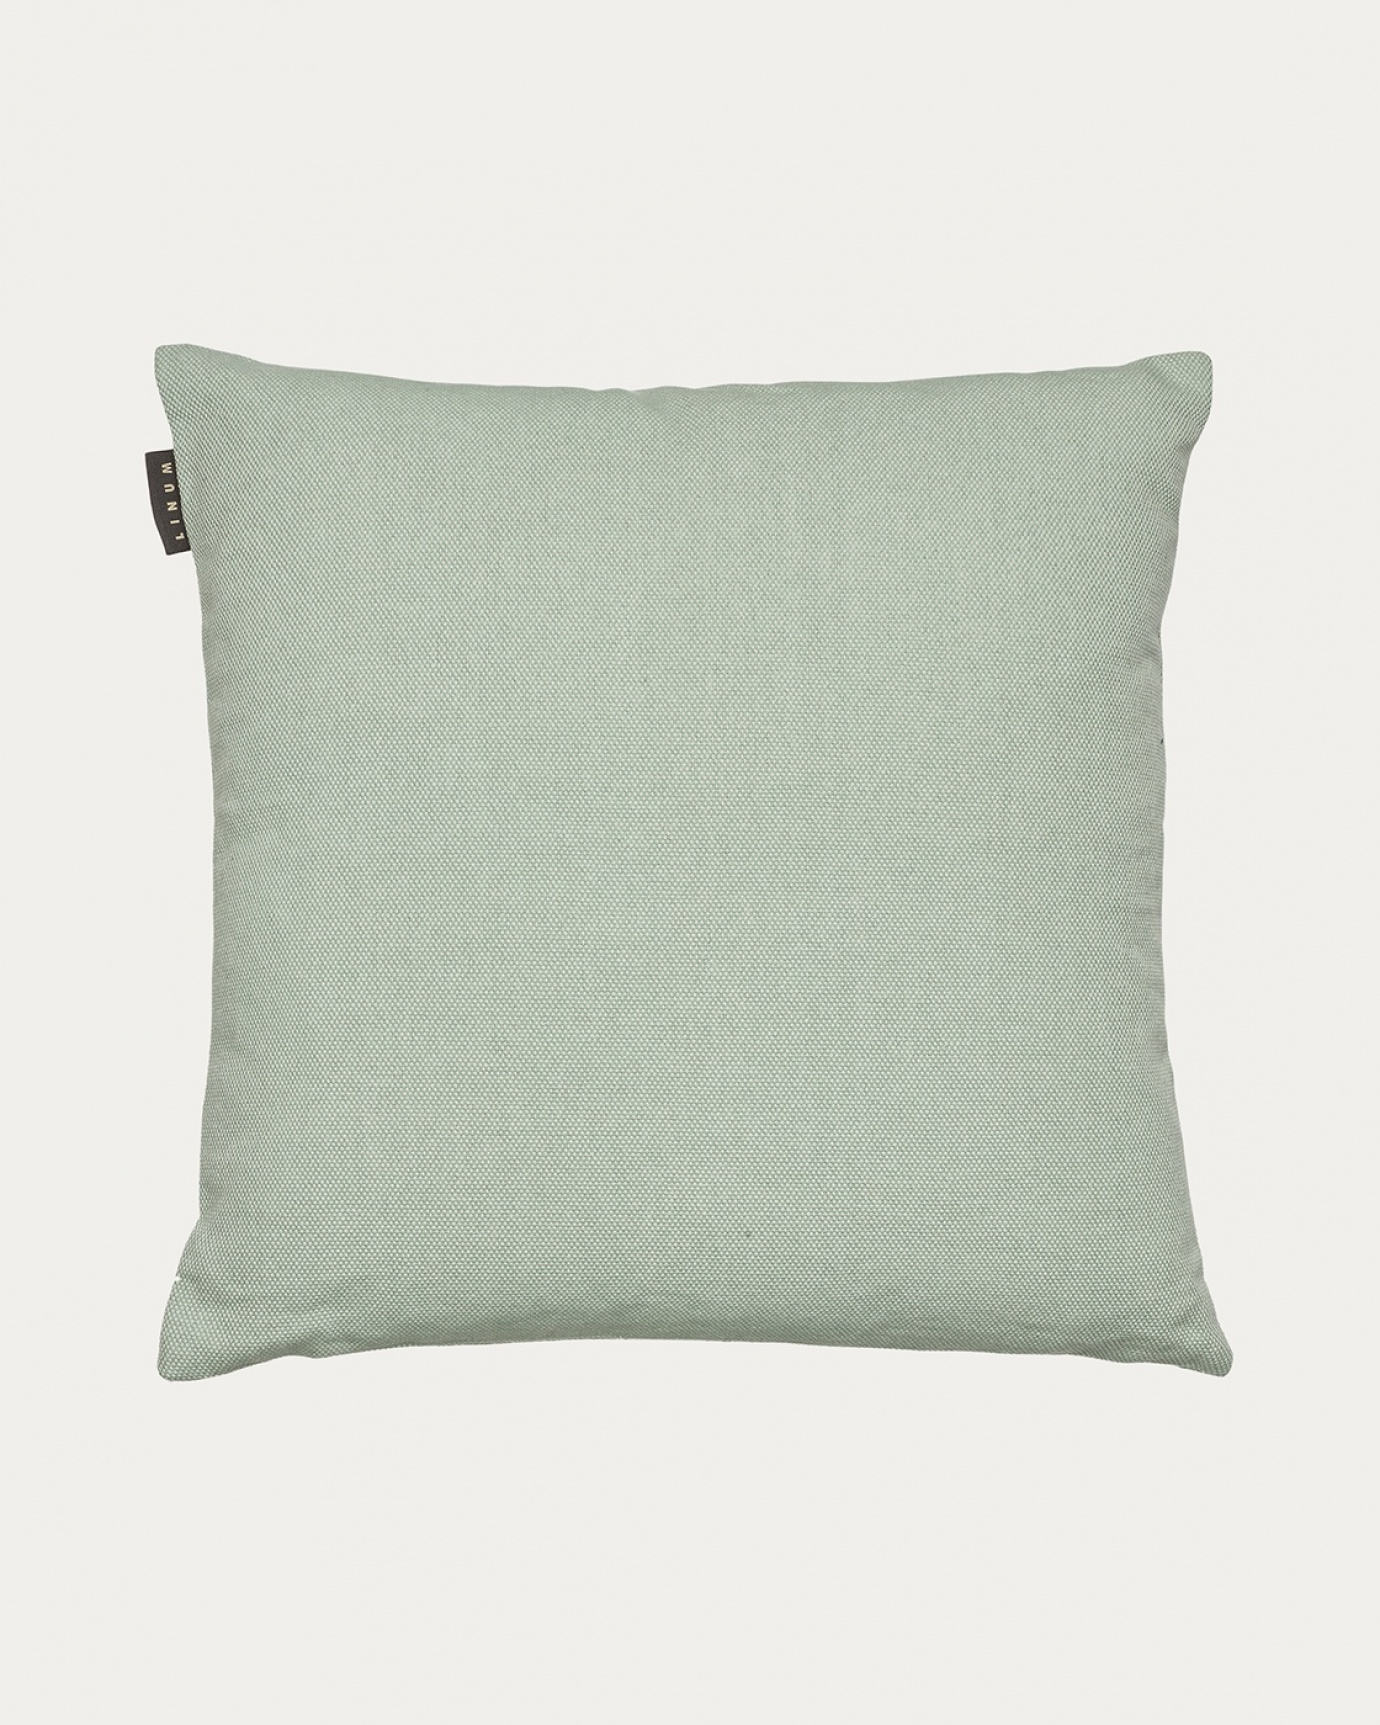 Product image light ice green PEPPER cushion cover made of soft cotton from LINUM DESIGN. Easy to wash and durable for generations. Size 50x50 cm.